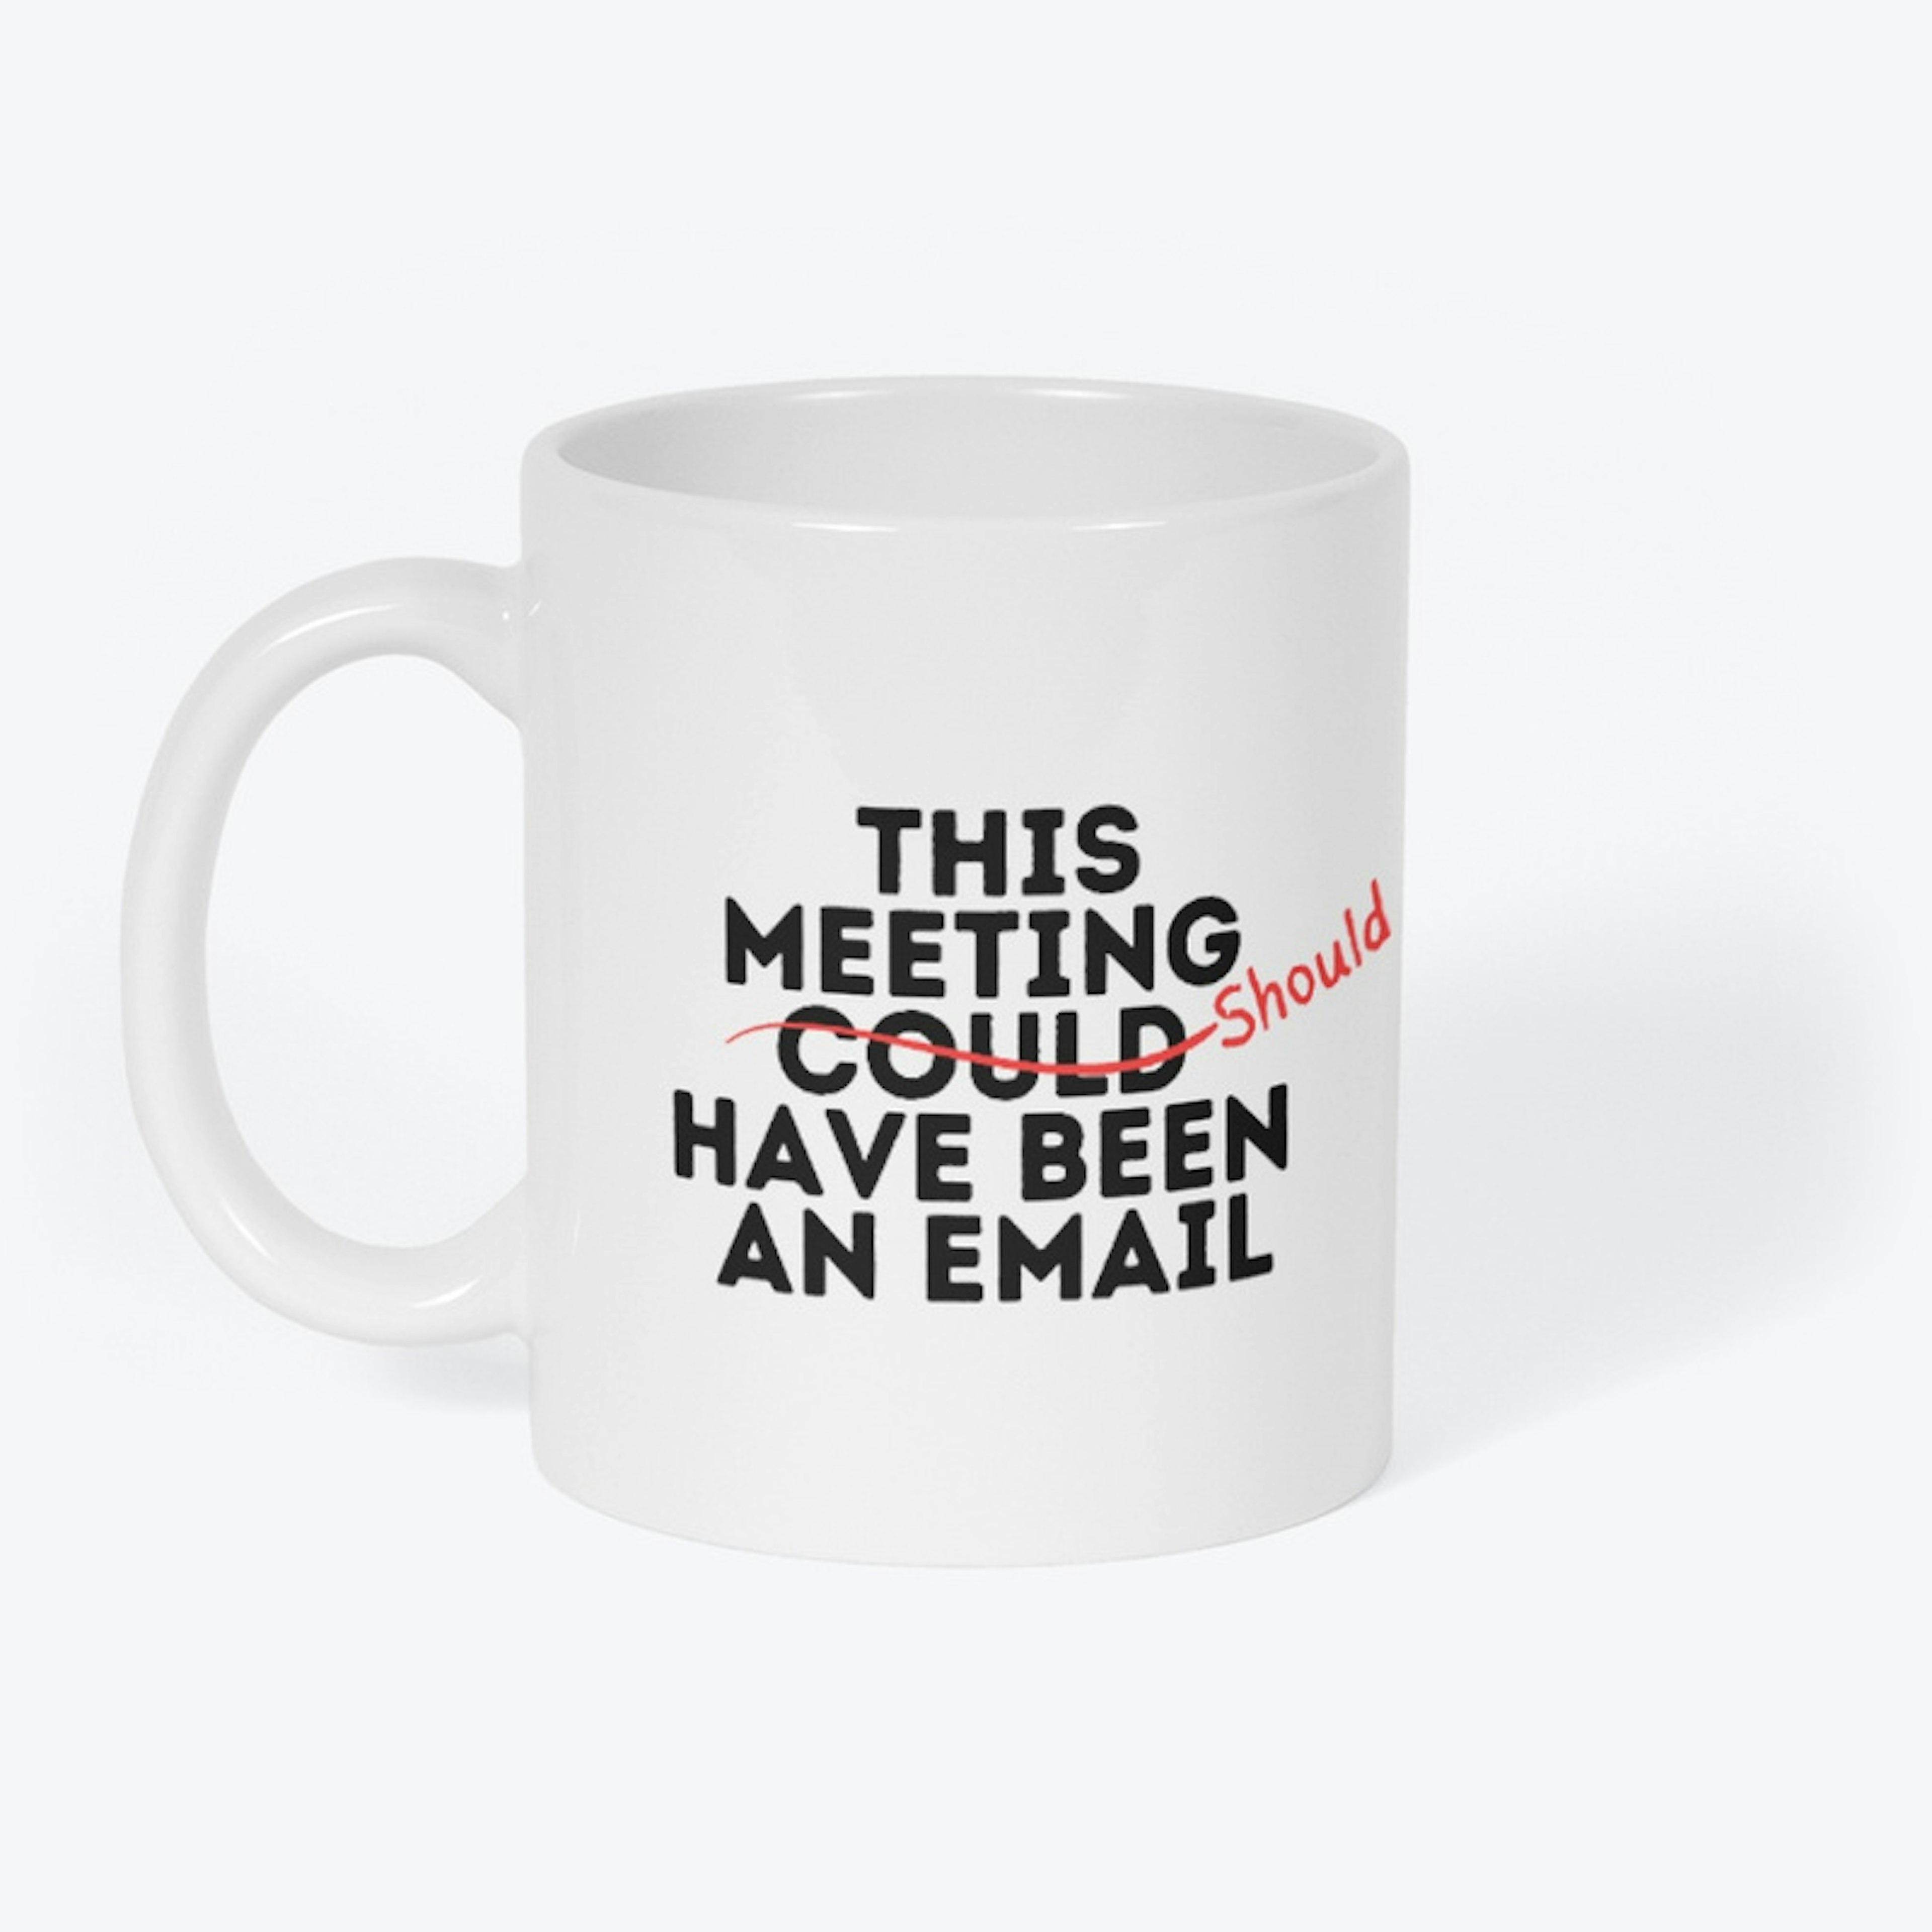 This Meeting Could Have Been an Email